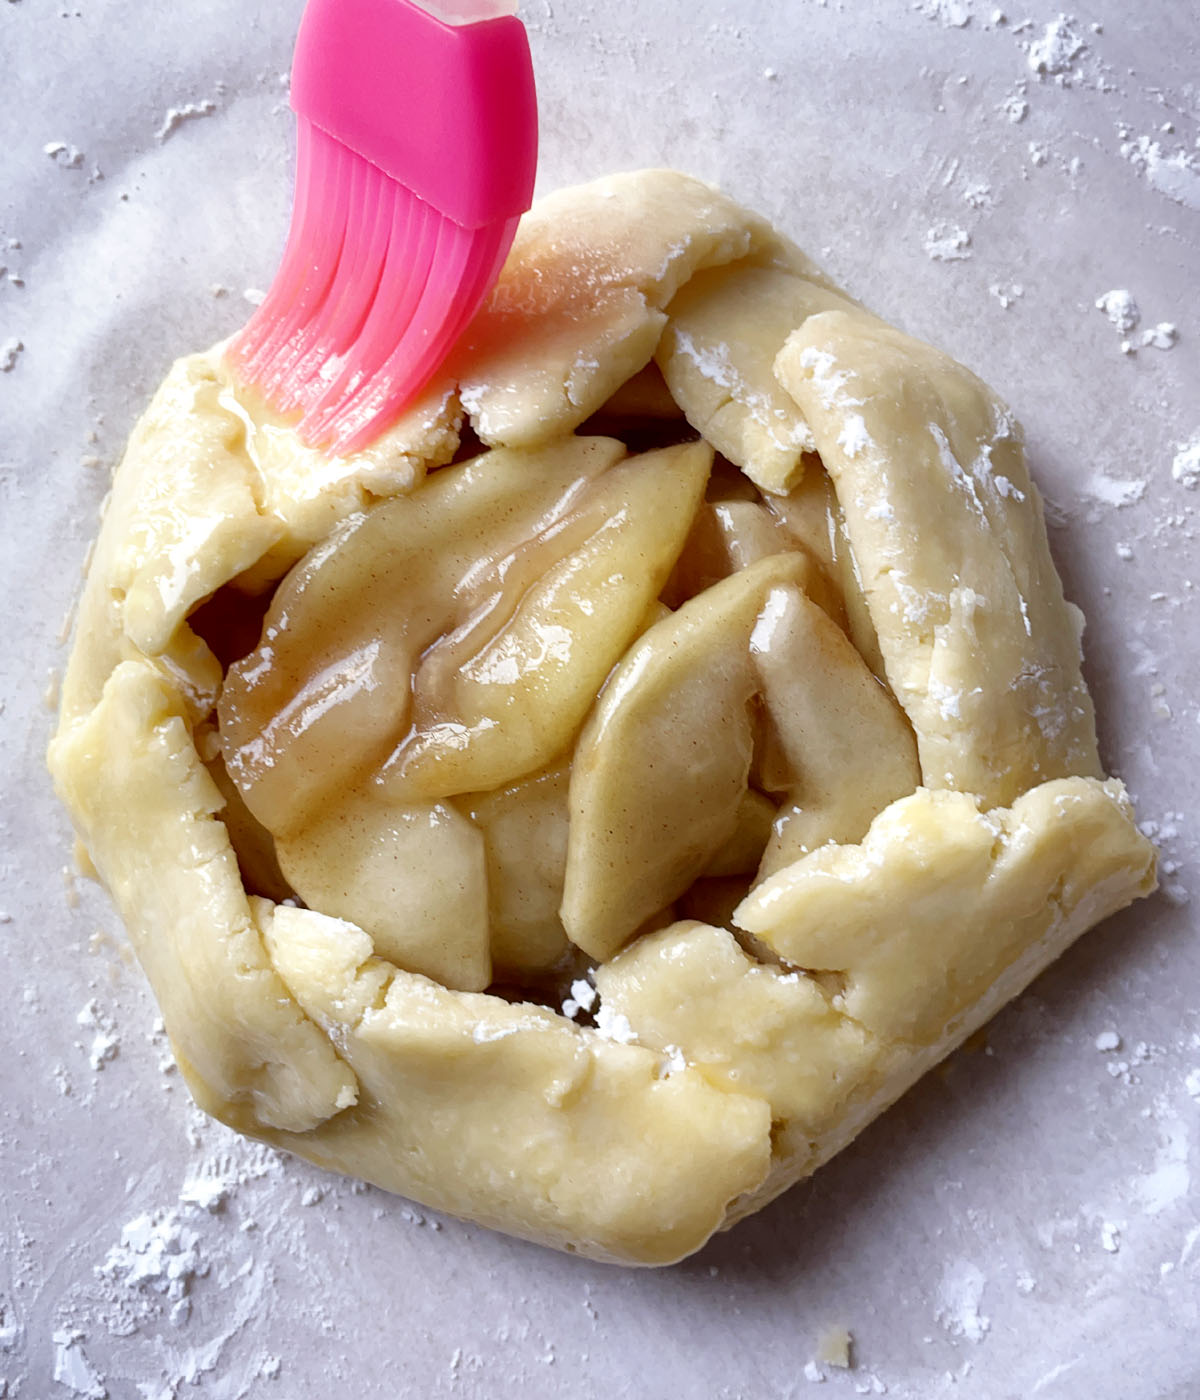 A pink brush spreading egg wash over the crust of an apple pie.